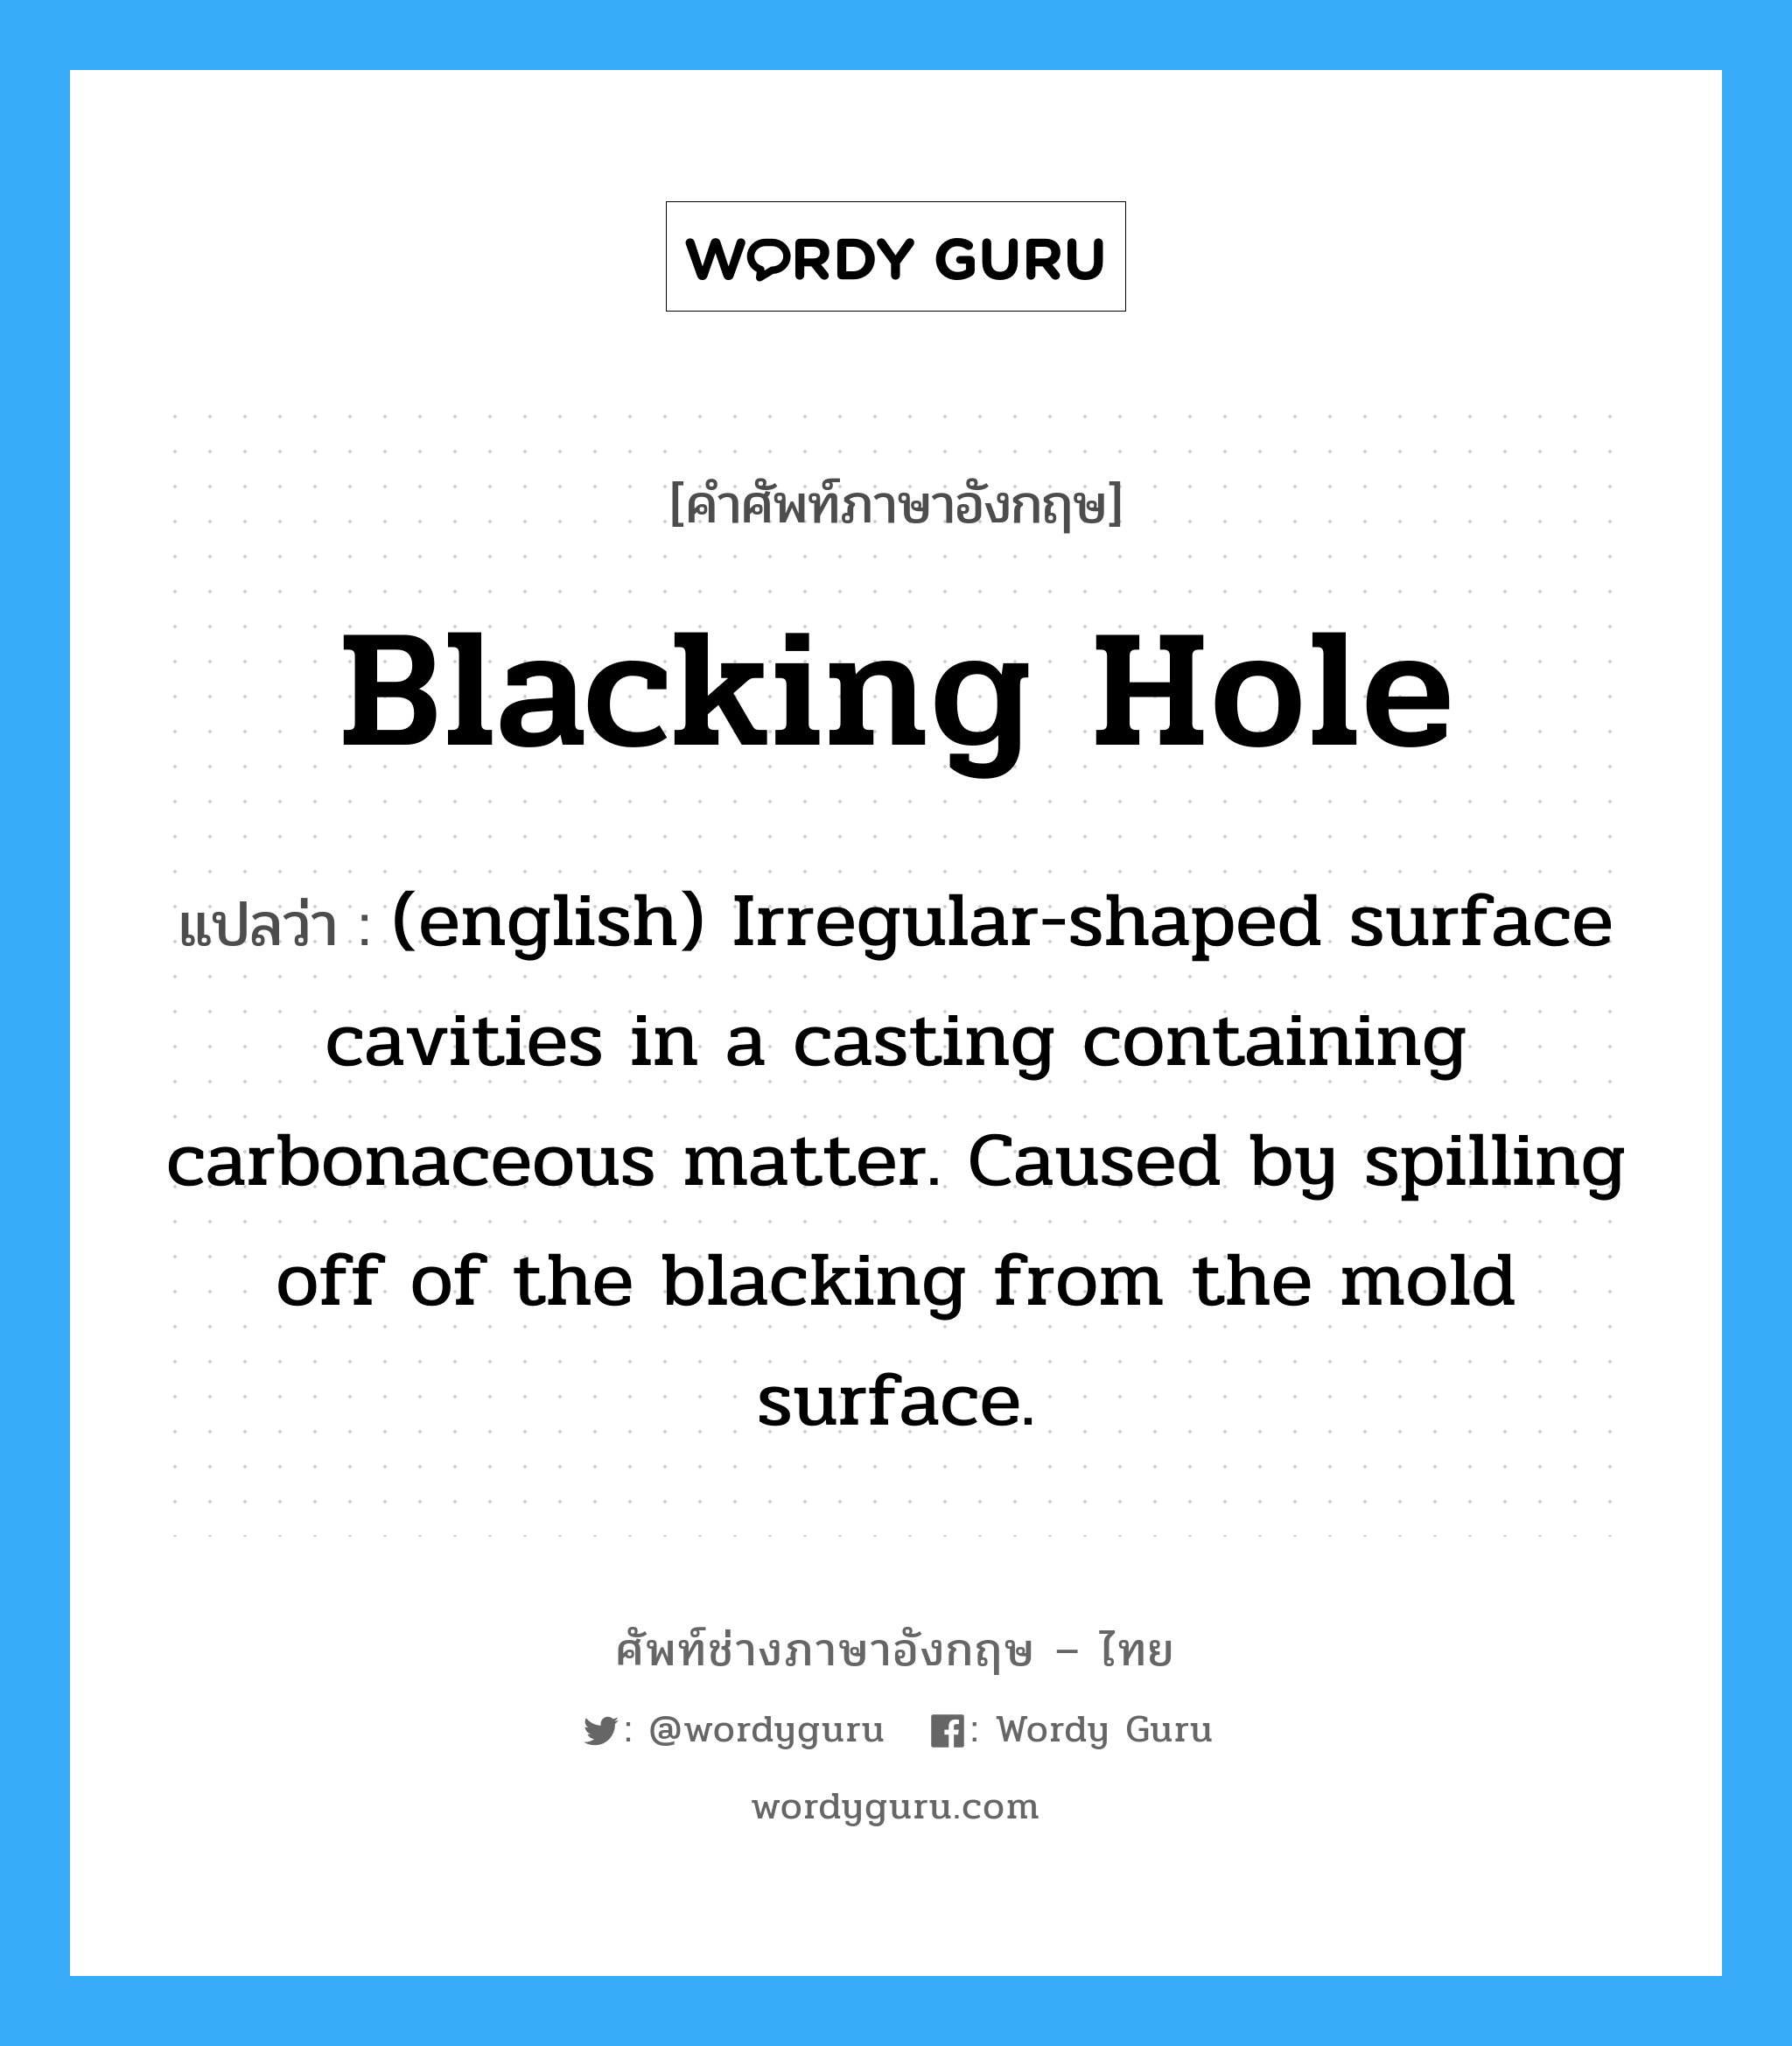 (english) Irregular-shaped surface cavities in a casting containing carbonaceous matter. Caused by spilling off of the blacking from the mold surface. ภาษาอังกฤษ?, คำศัพท์ช่างภาษาอังกฤษ - ไทย (english) Irregular-shaped surface cavities in a casting containing carbonaceous matter. Caused by spilling off of the blacking from the mold surface. คำศัพท์ภาษาอังกฤษ (english) Irregular-shaped surface cavities in a casting containing carbonaceous matter. Caused by spilling off of the blacking from the mold surface. แปลว่า Blacking Hole